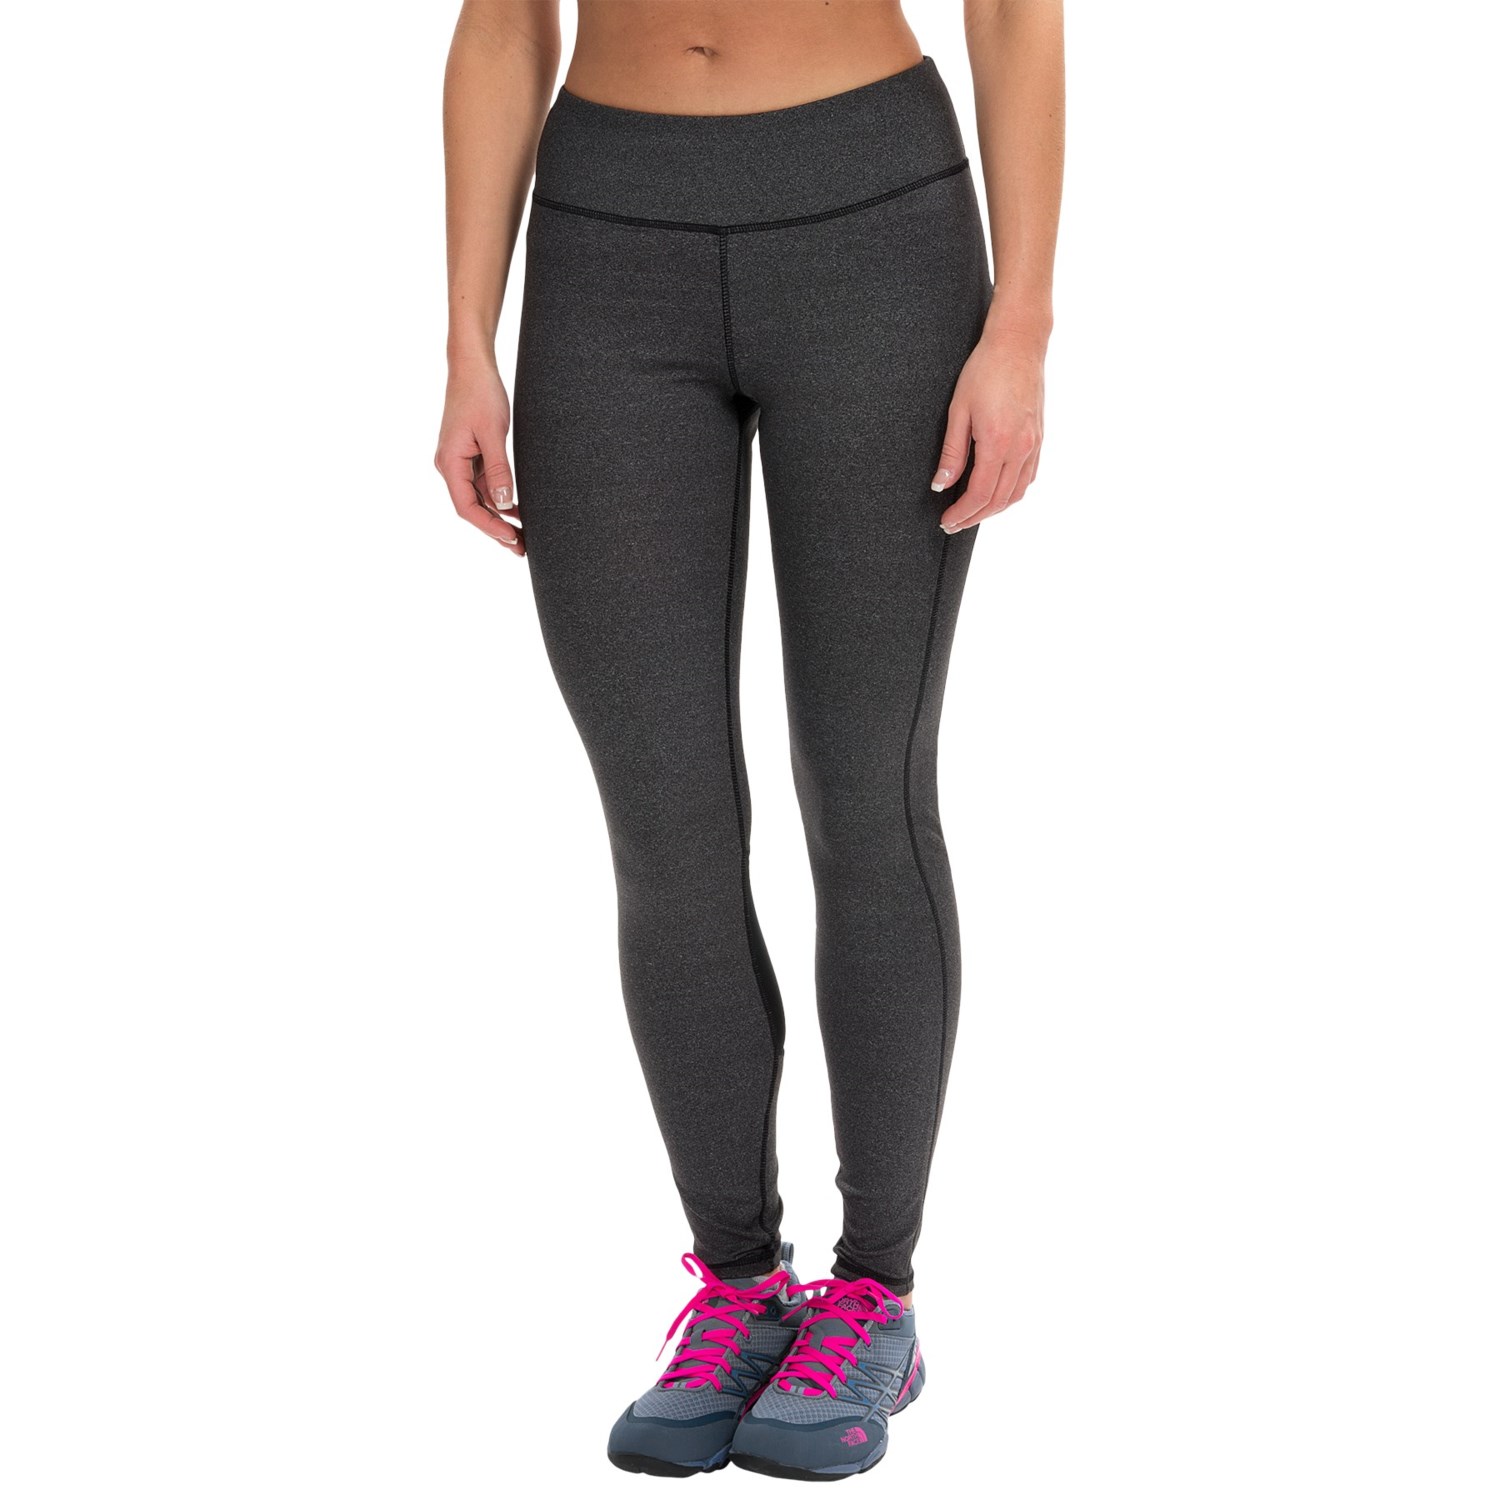 Kyodan Technical Running Tights (For Women) 132WD - Save 55%